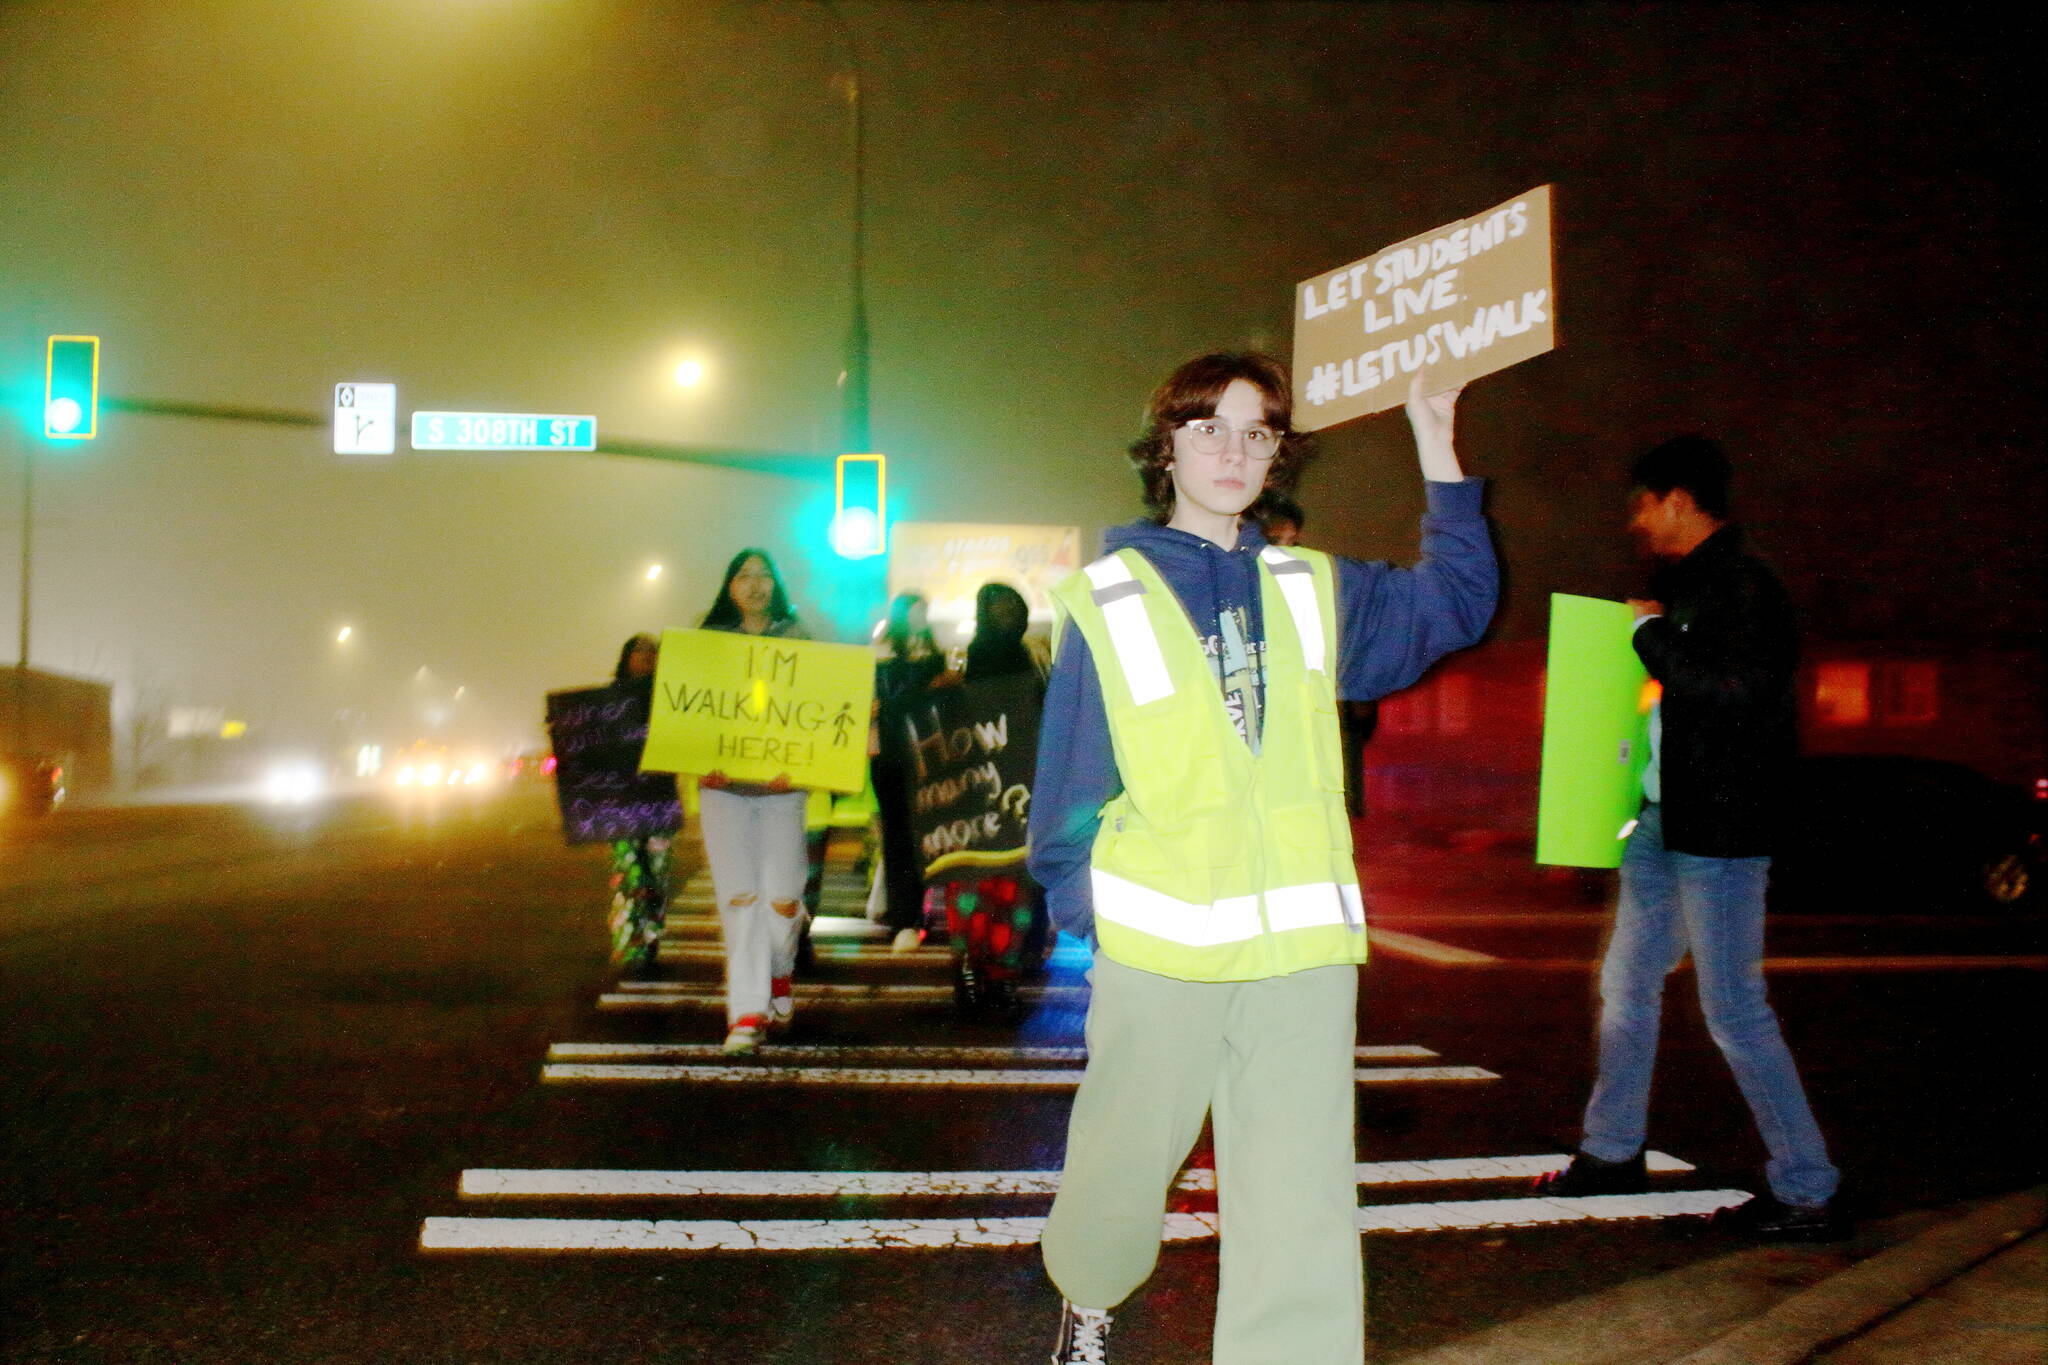 Students donned safety vests as they protested in the intersection in front of Federal Way High School that has been the site of multiple pedestrian incidents. (Photo by Keelin Everly-Lang / Sound Publishing)